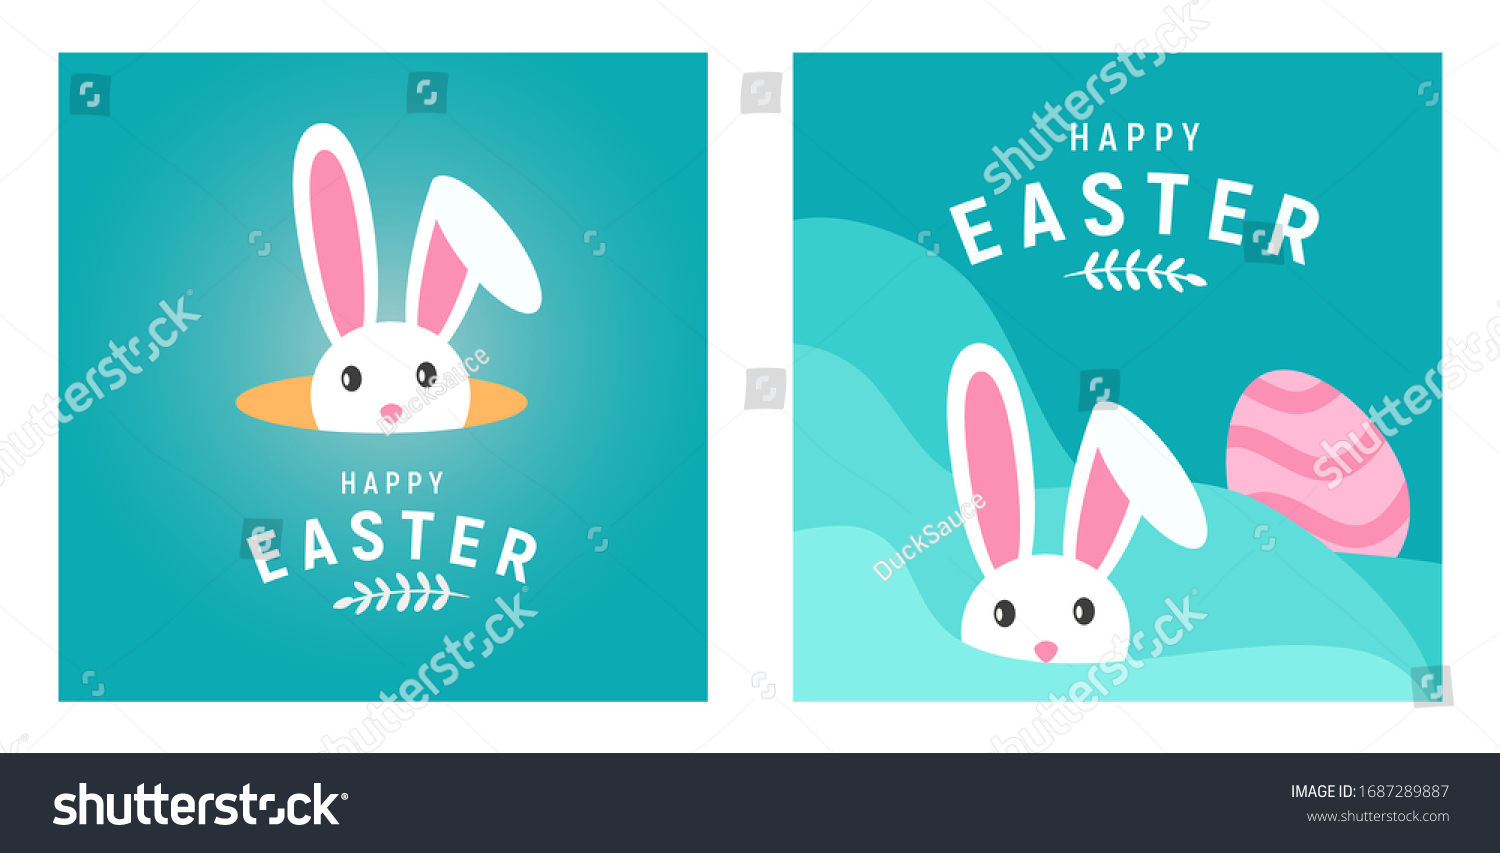 Bundle Happy easter with white rabbit, egg and lettering. creative design for banner, Greeting card, or social media post. #1687289887